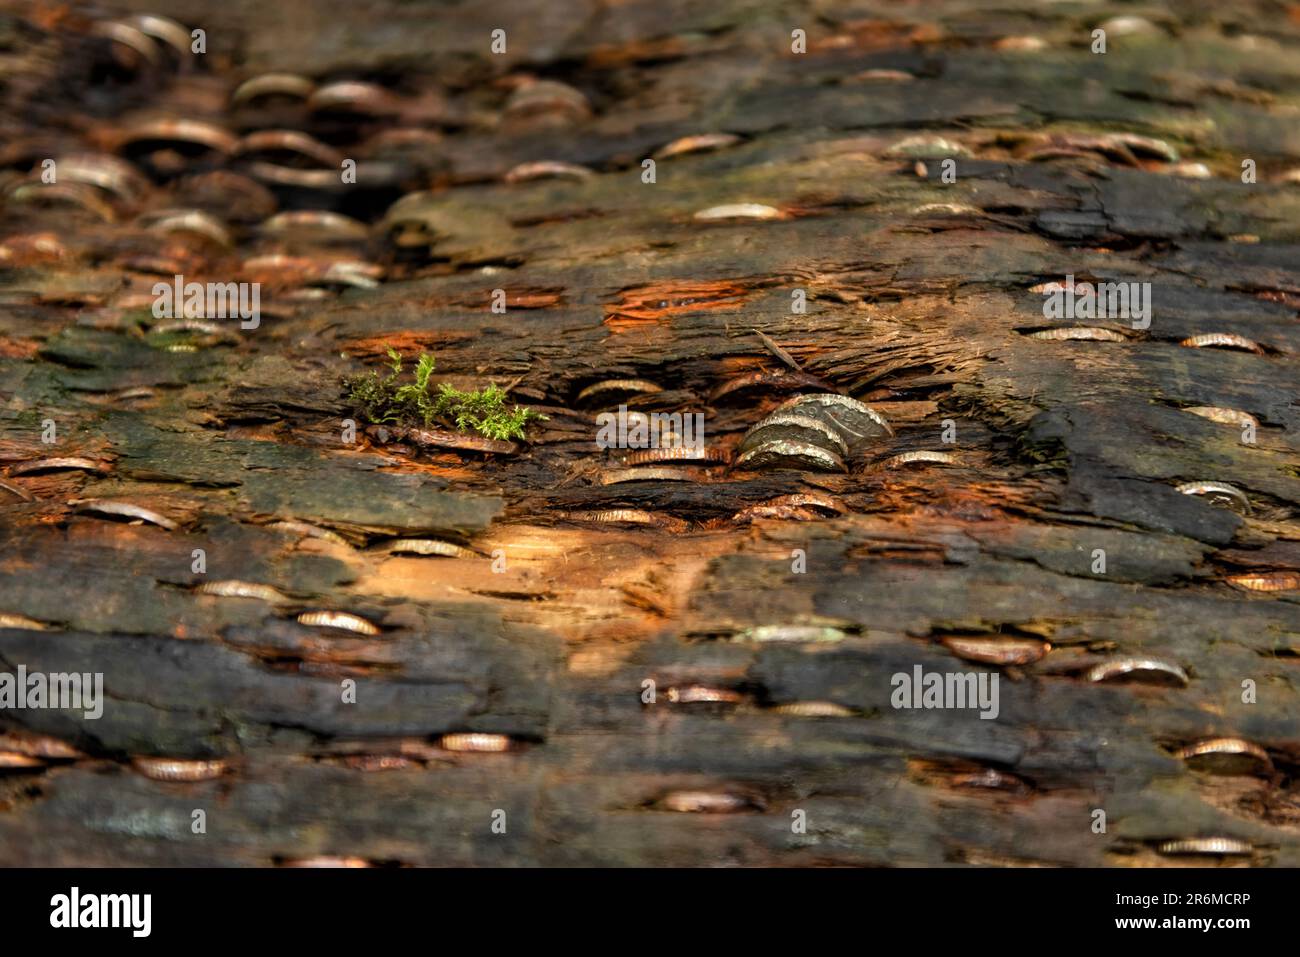 Coins hammered into tree trunk for good luck,fortune and health Stock Photo